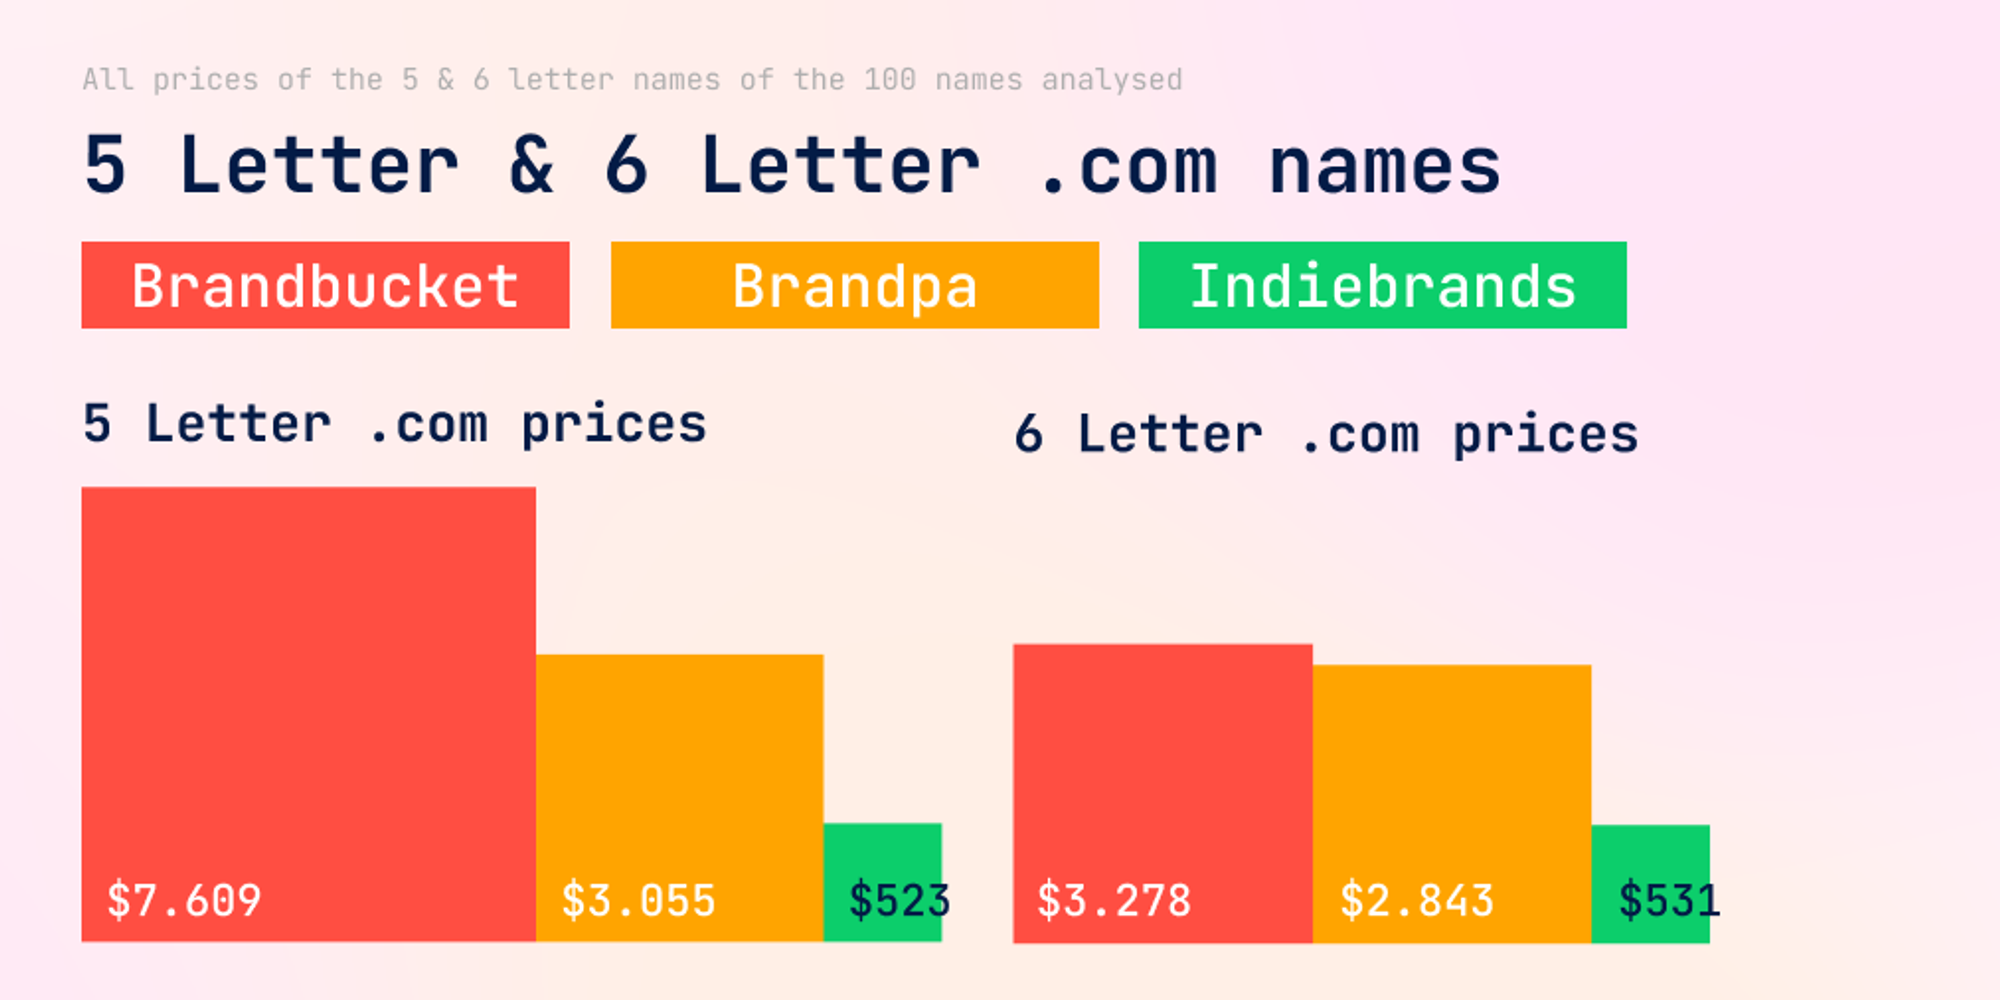 Prices of 5 & 6 Letter .com domains. Source - 